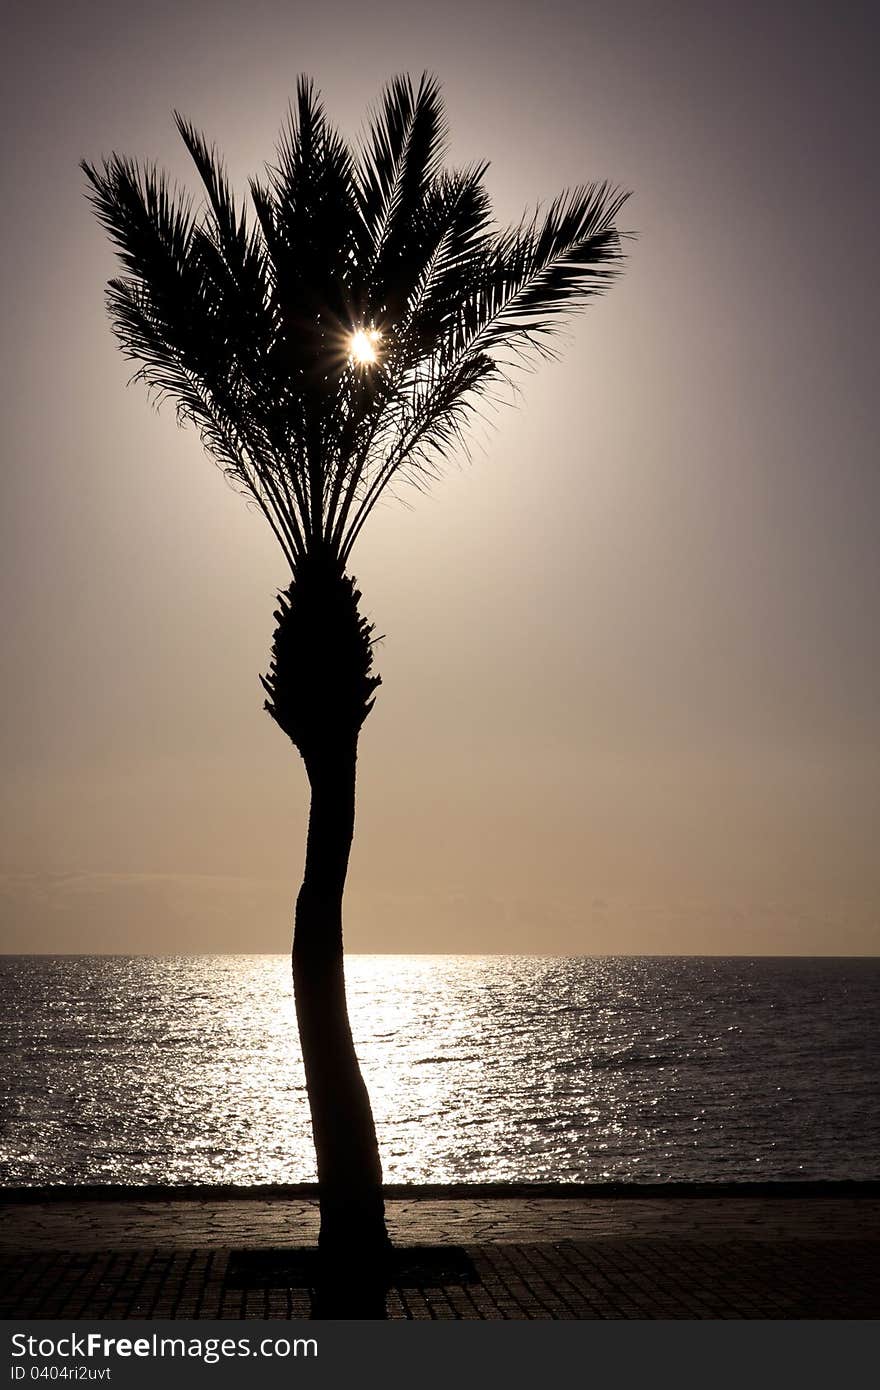 Low sun shines through a palm tree standing on an ocean front. Low sun shines through a palm tree standing on an ocean front.